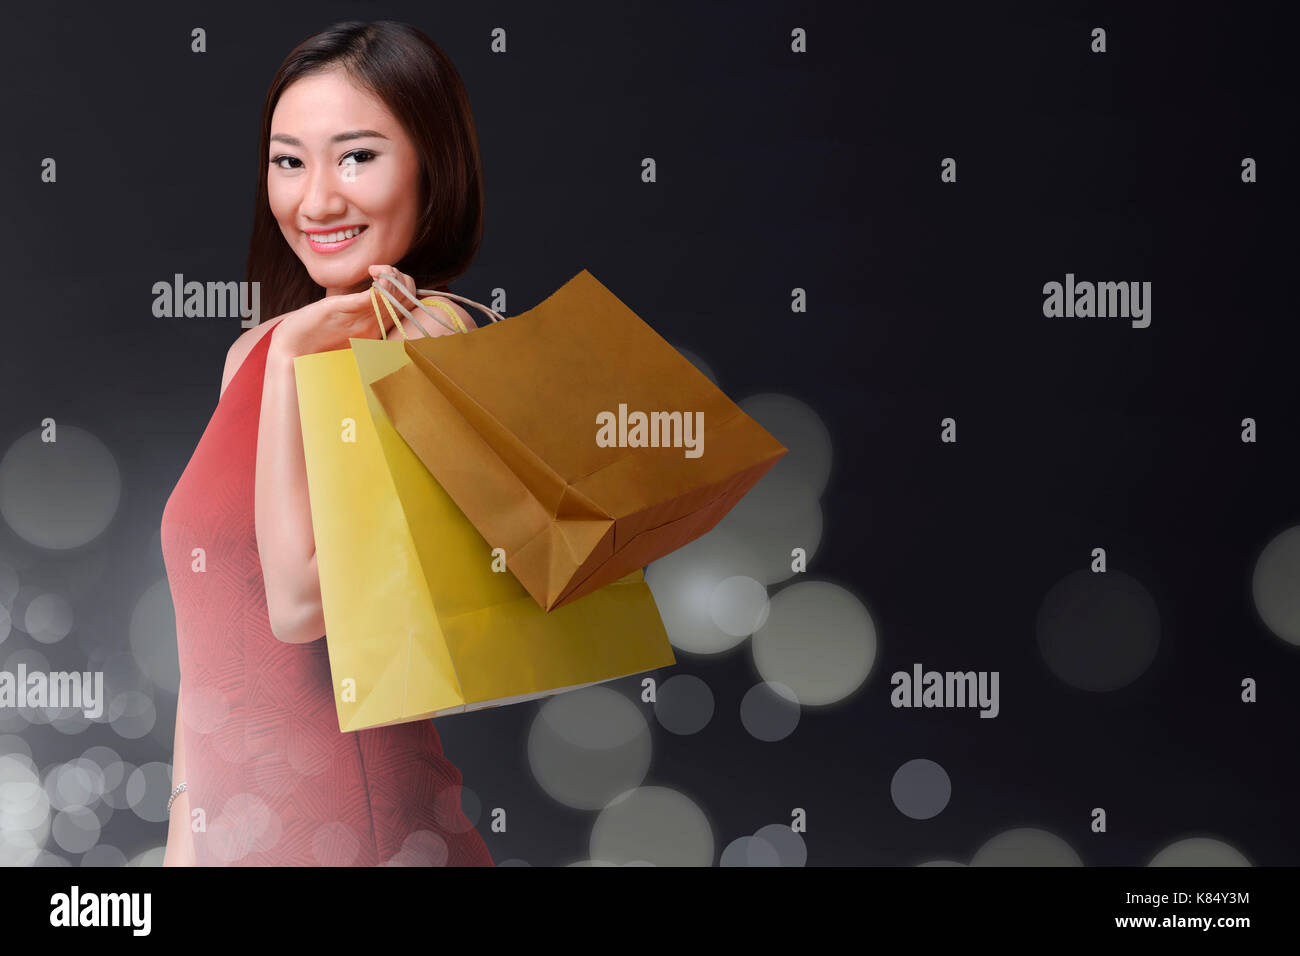 Smiling asian woman with bag shopping in black friday holiday over bokeh background Stock Photo